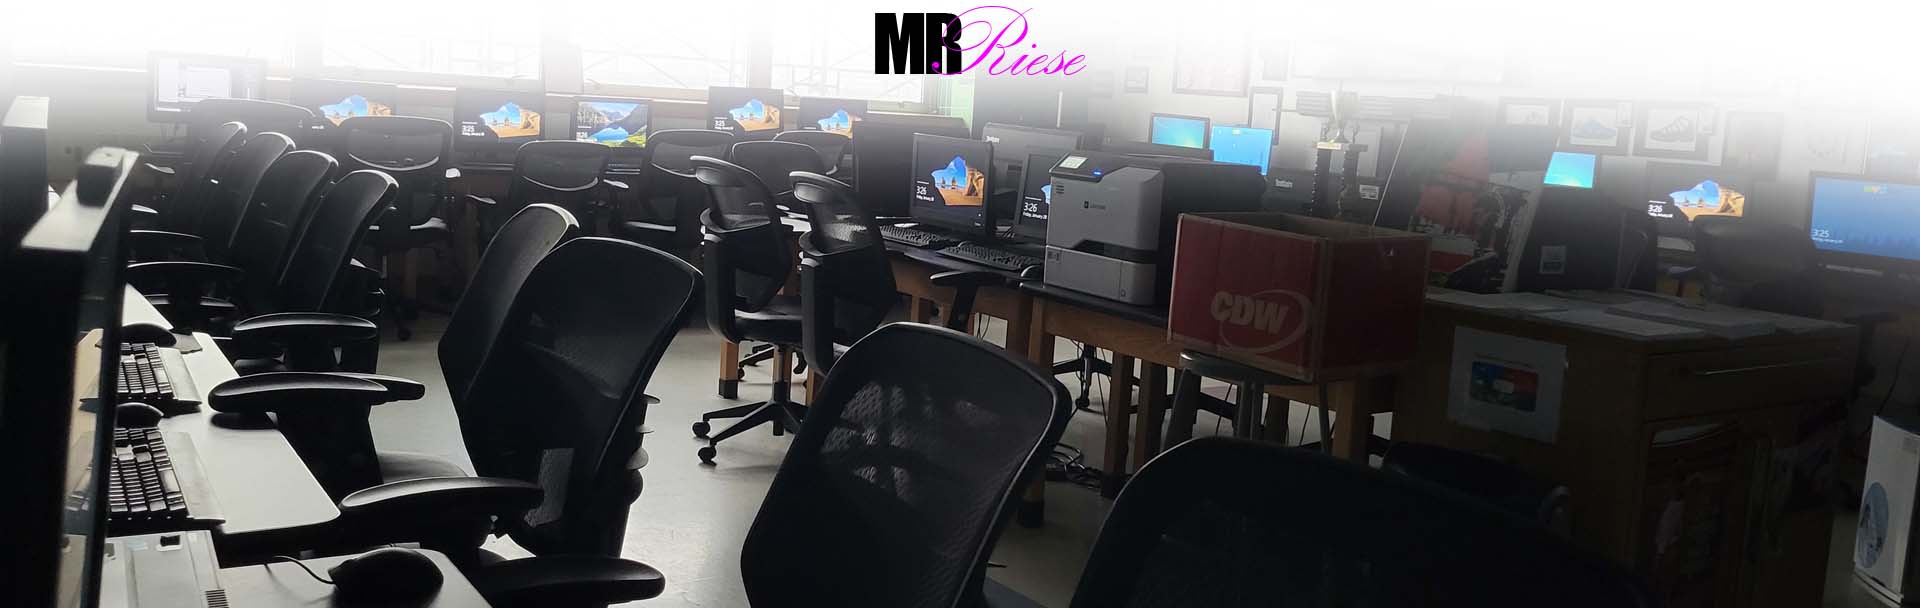 Classroom Image | Mr. Riese